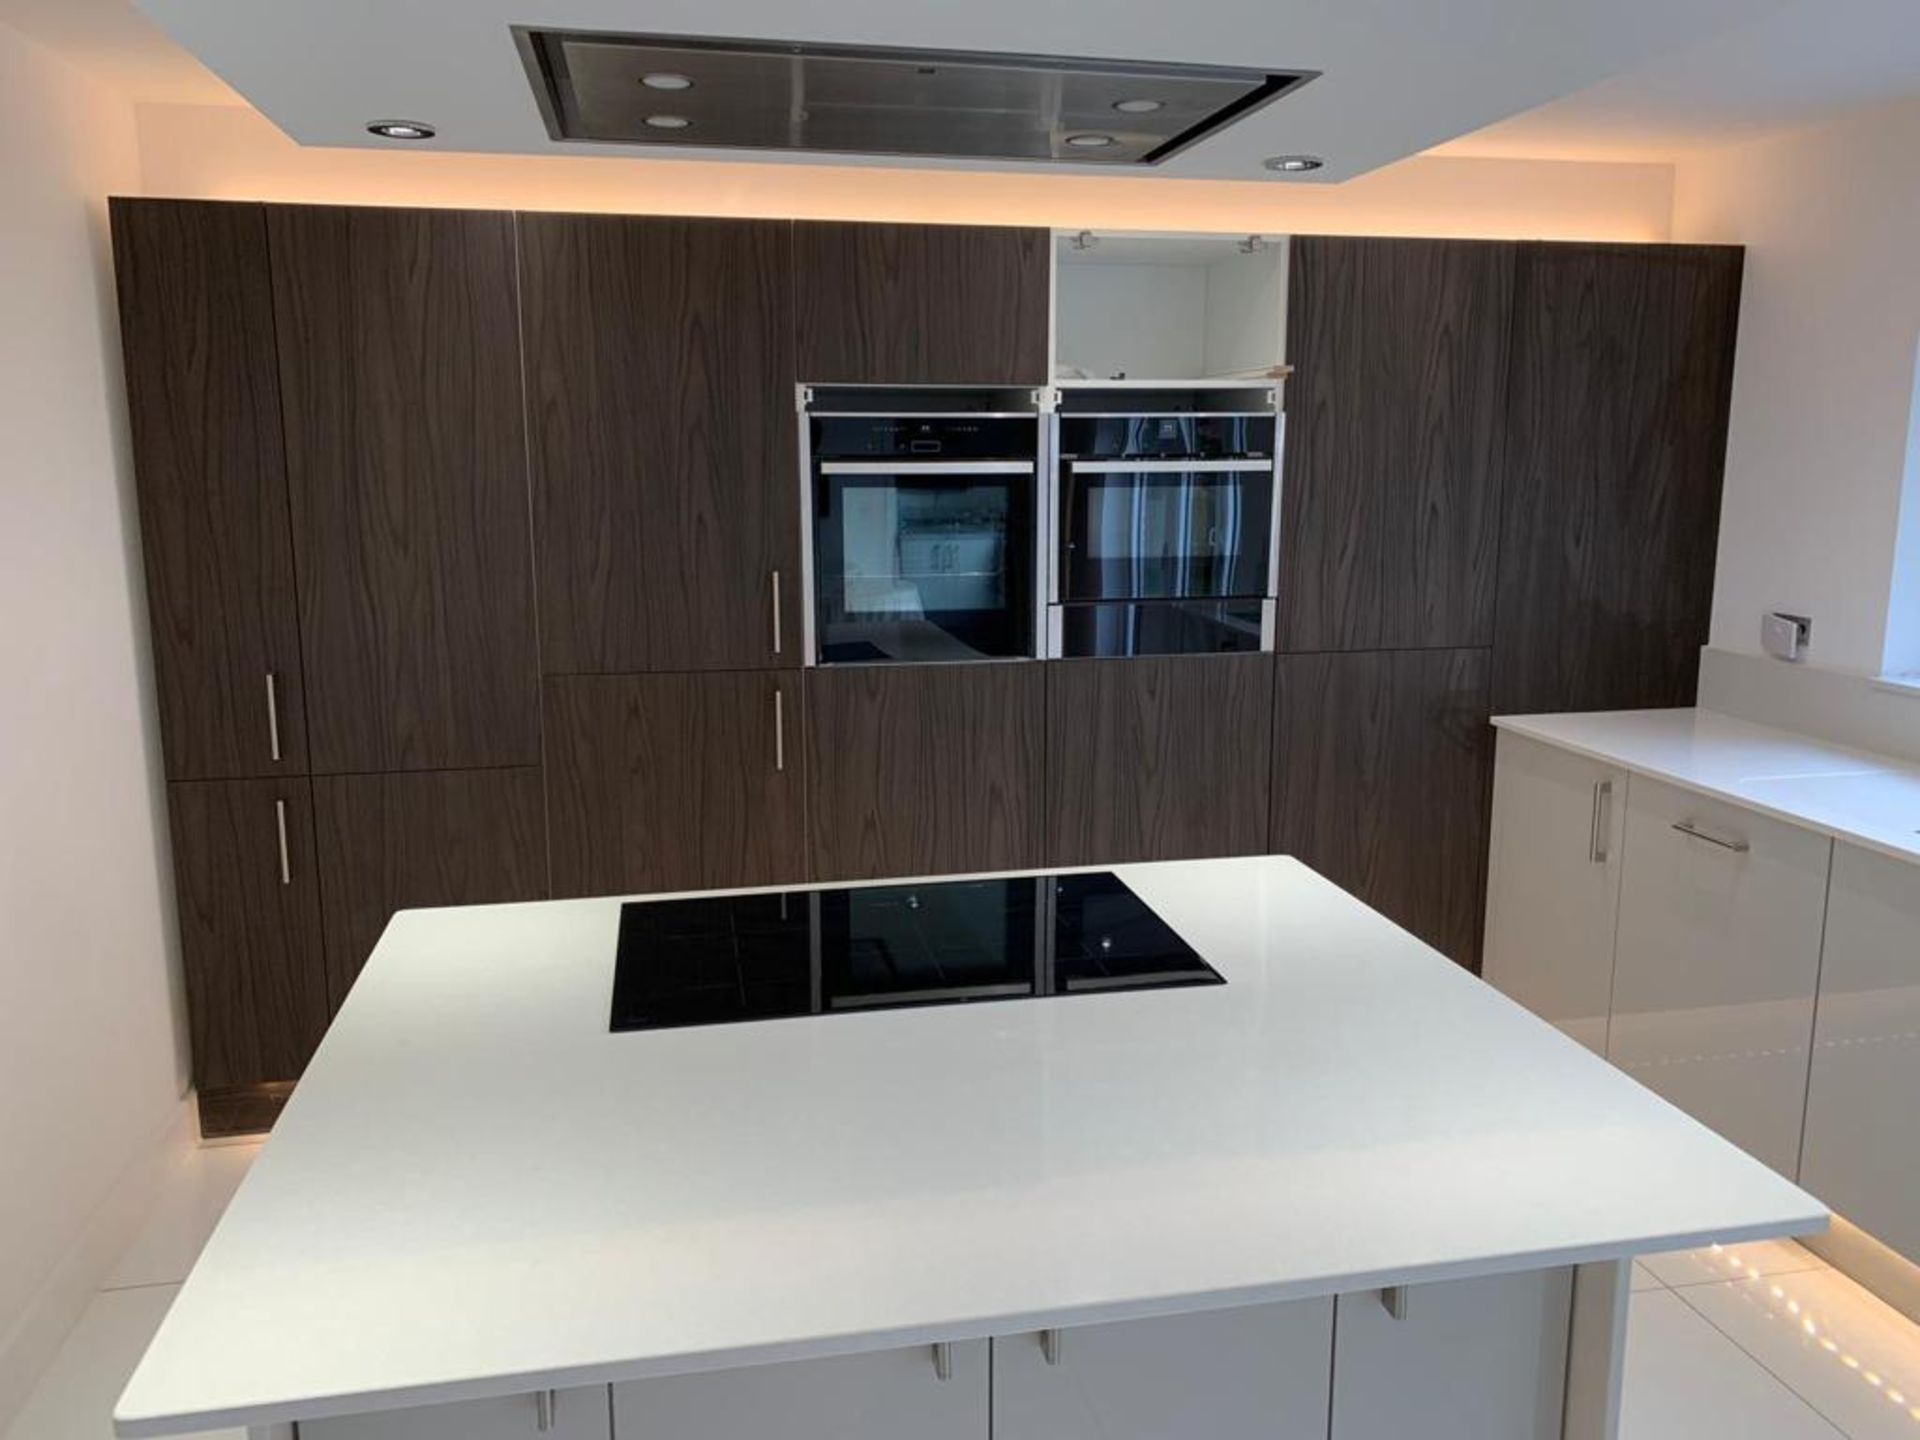 1 x SYMPHONY Contemporary Bespoke Fitted Kitchen With Integrated Bosch Appliances & Quartz Worktops - Image 6 of 18